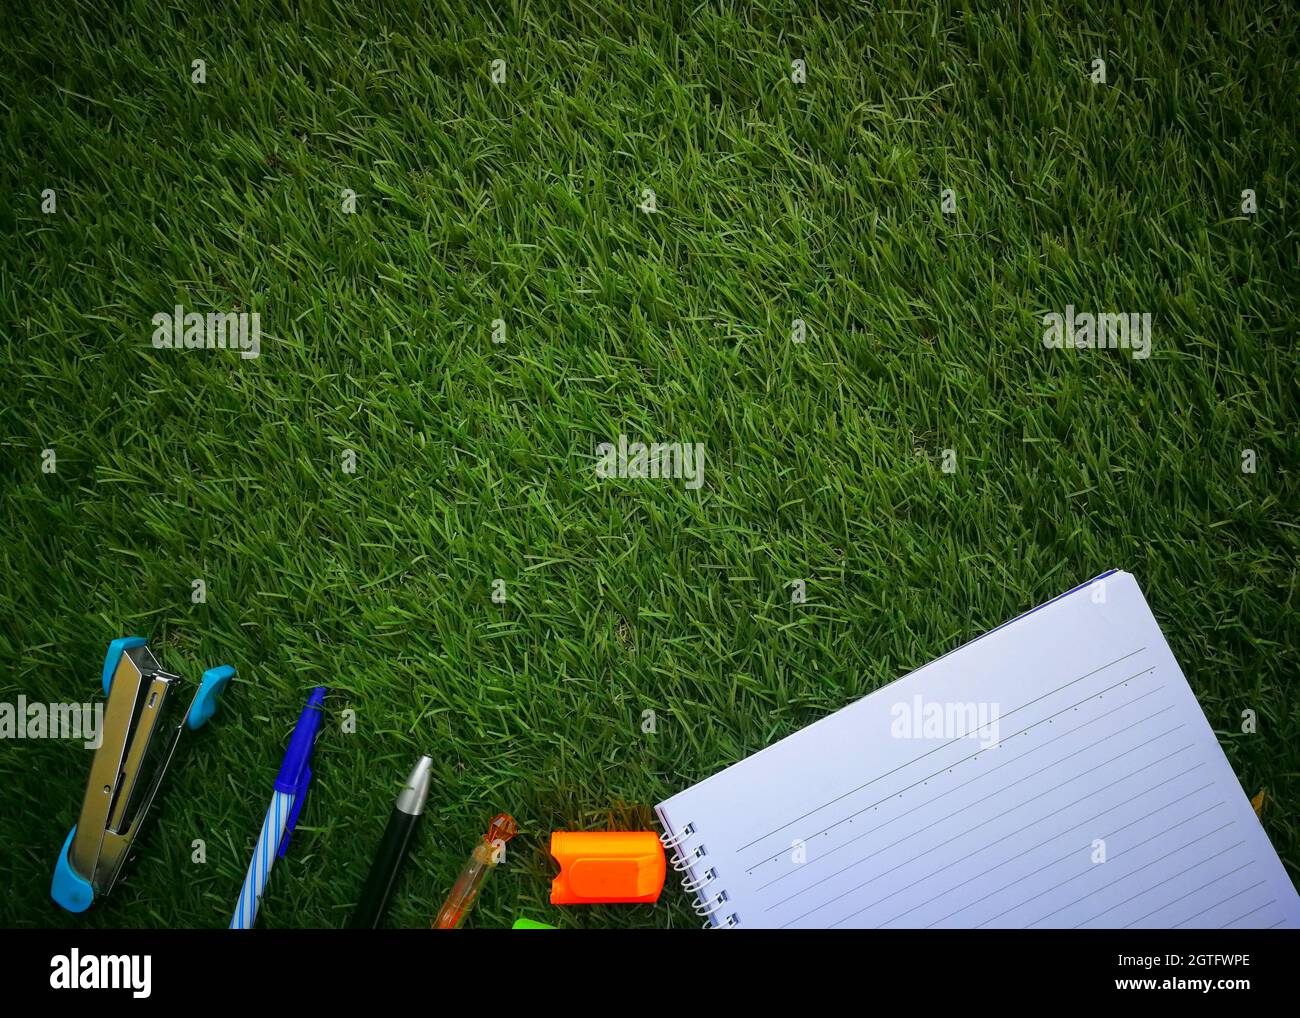 Directly Above Shot Of Office Supplies On Grassy Field Stock Photo